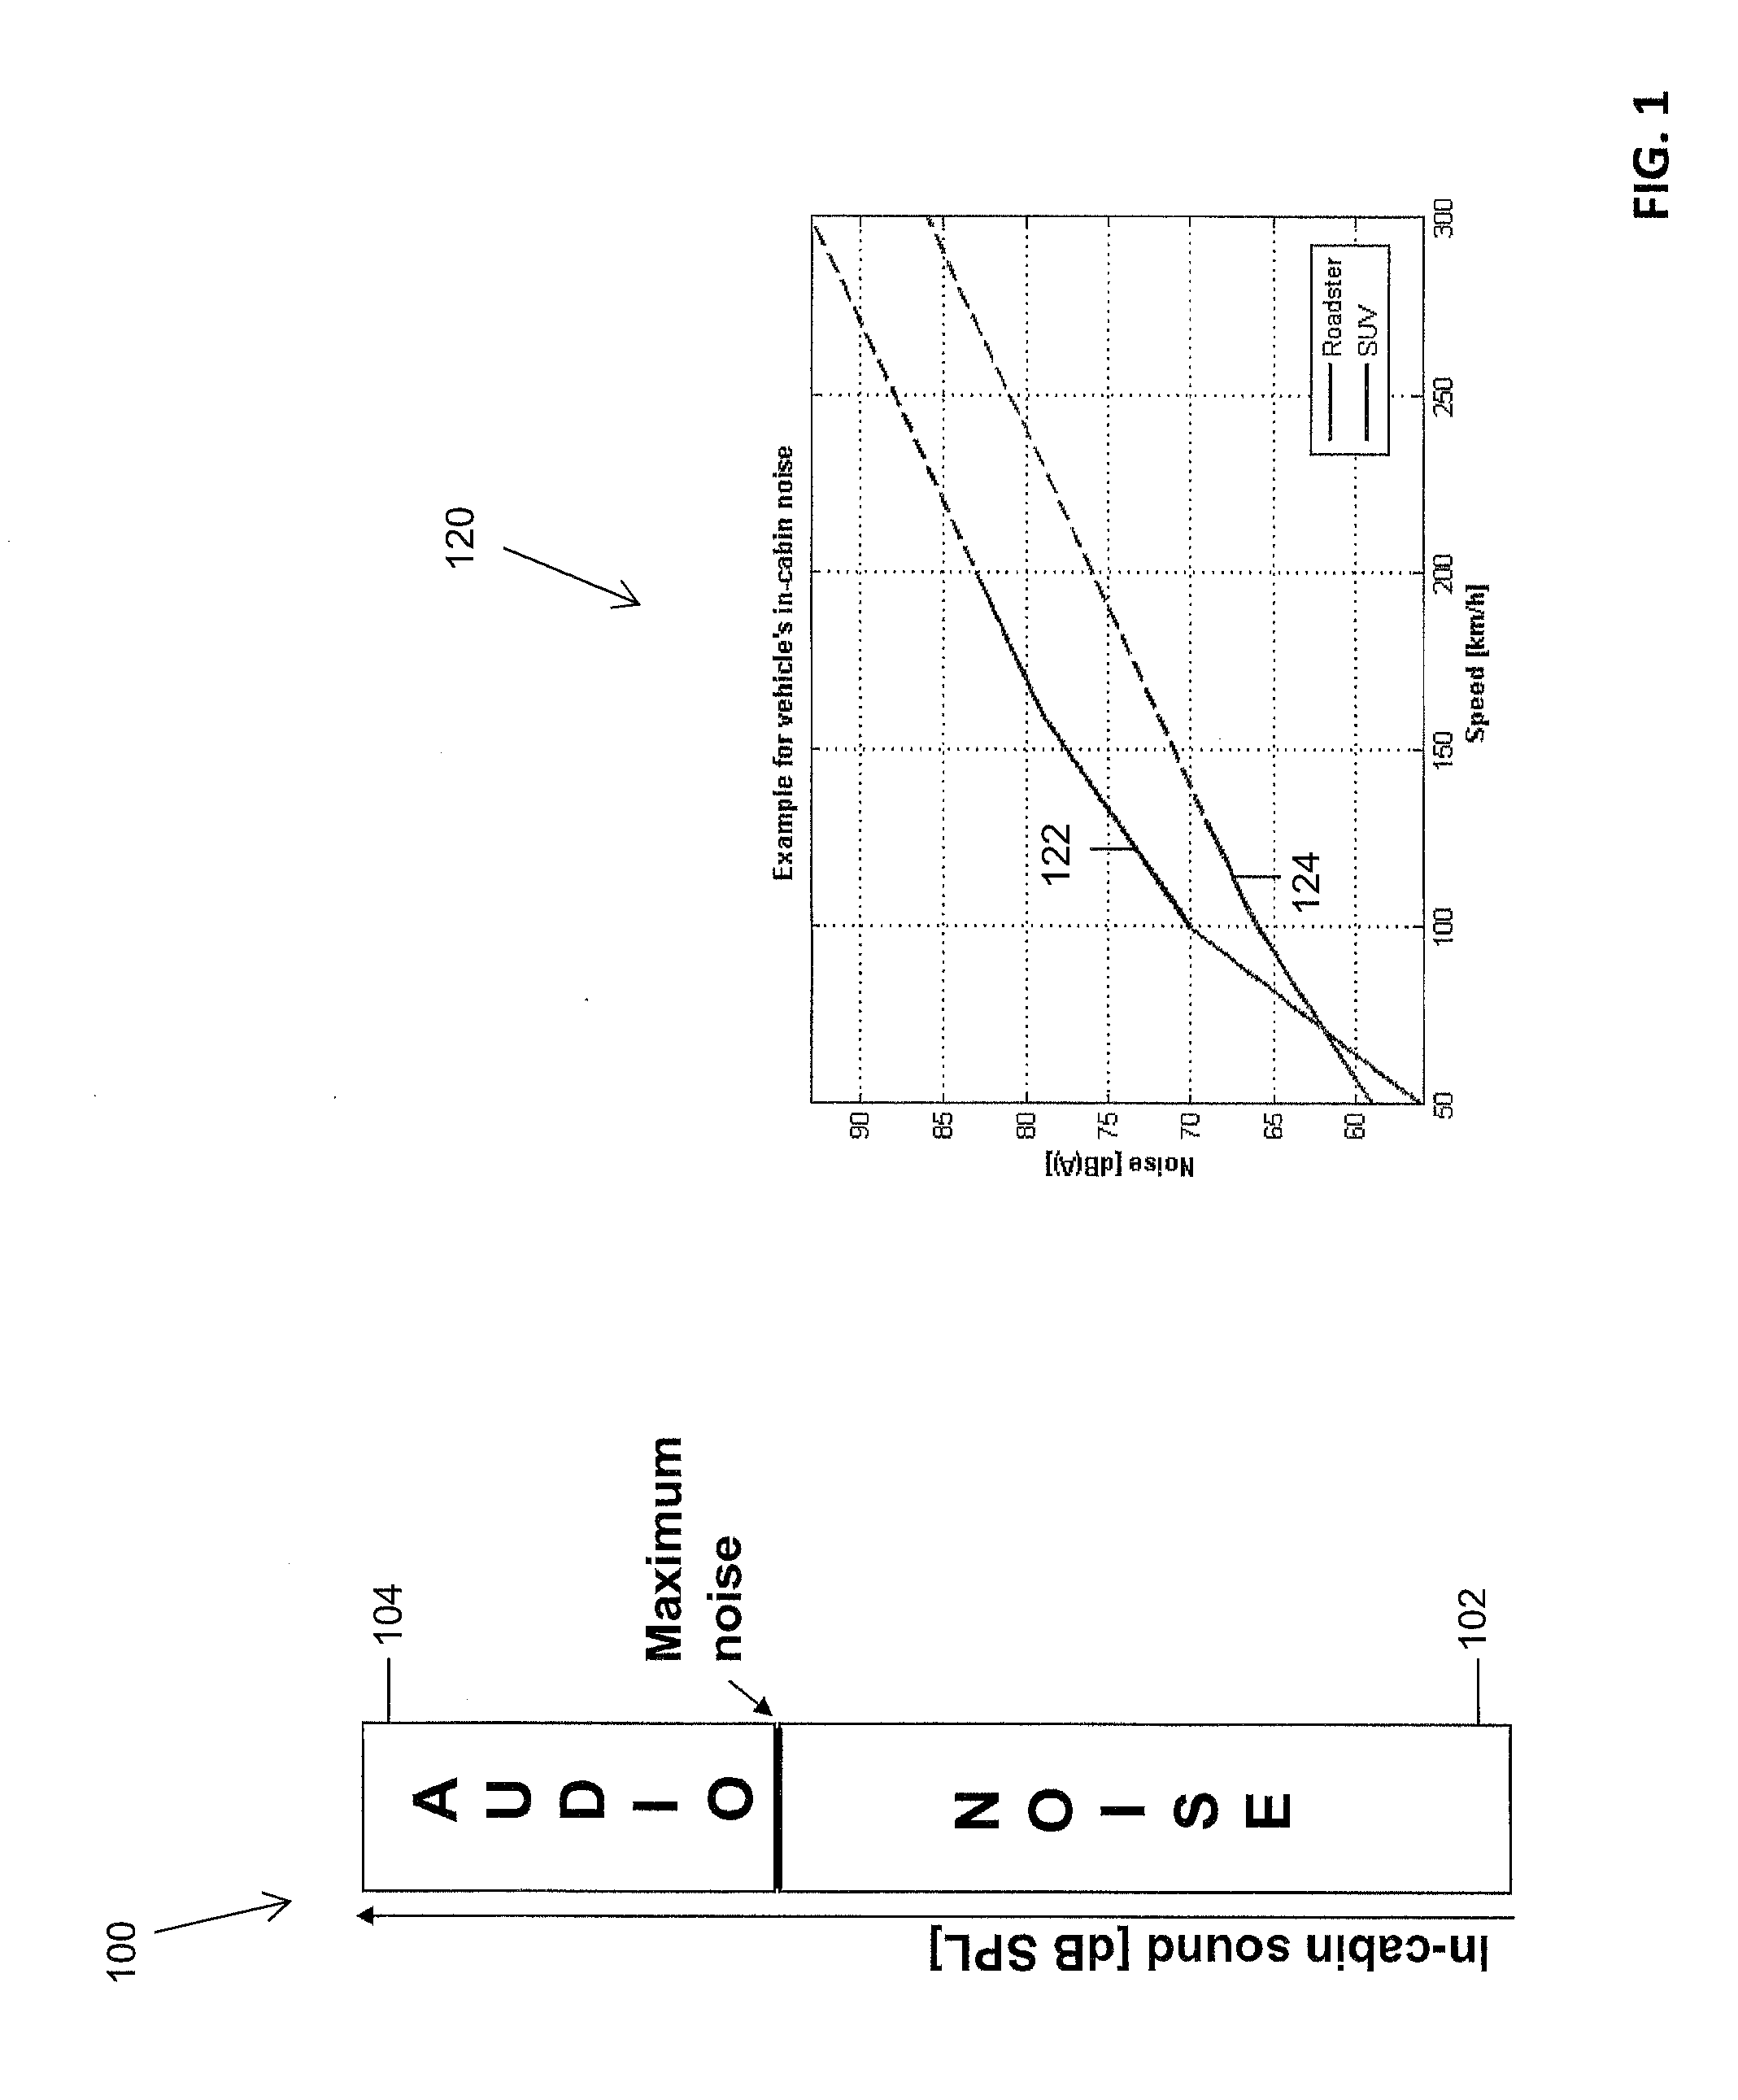 Automatic correction of loudness level in audio signals